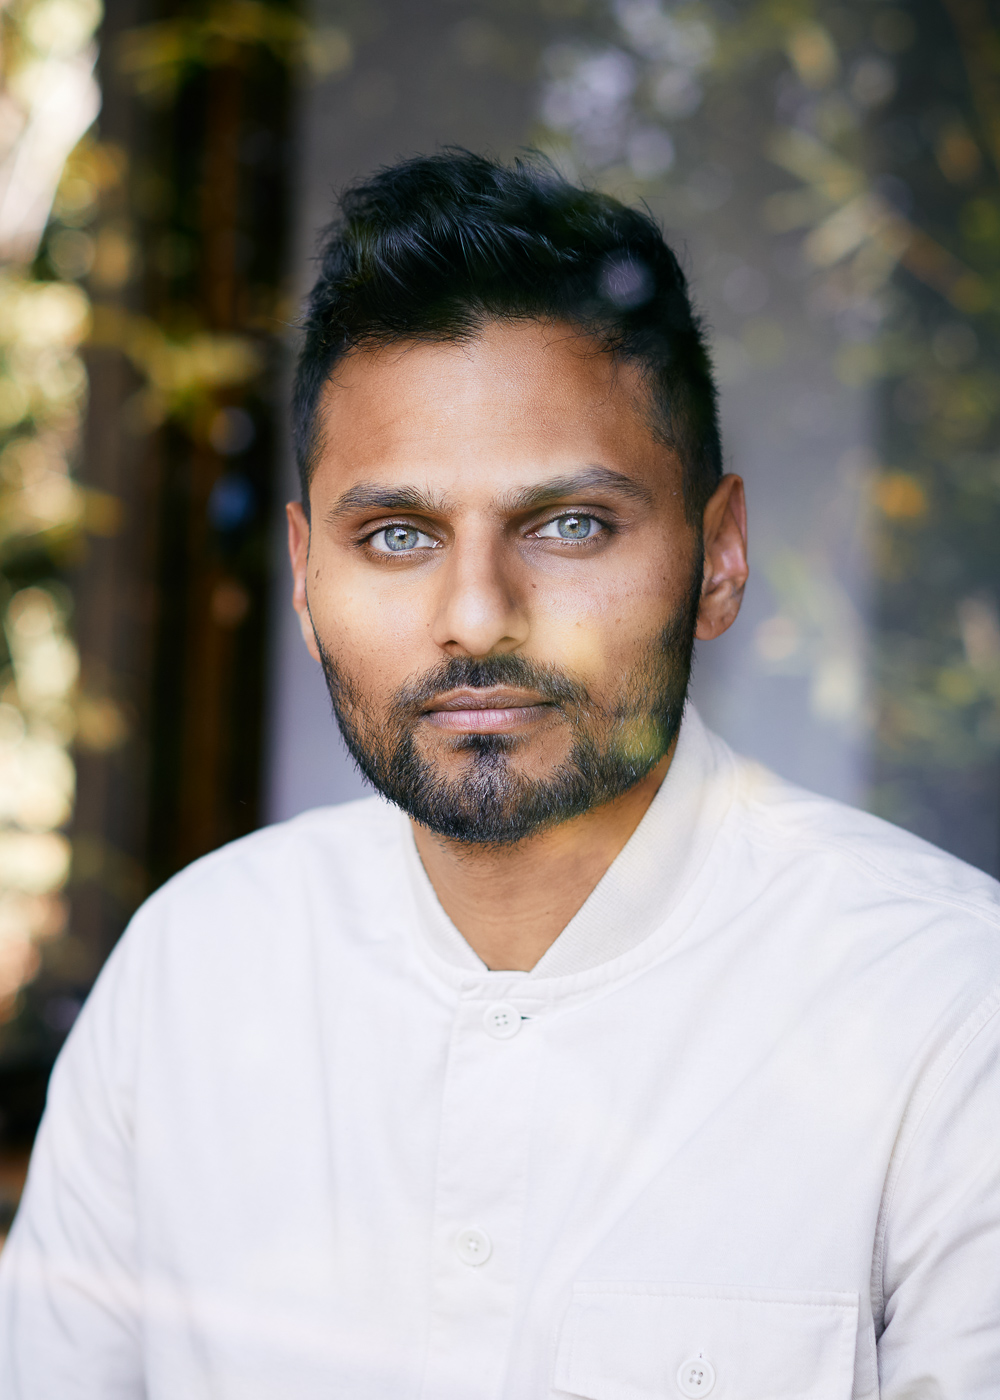 Jay Shetty, British author, former monk and purpose coach